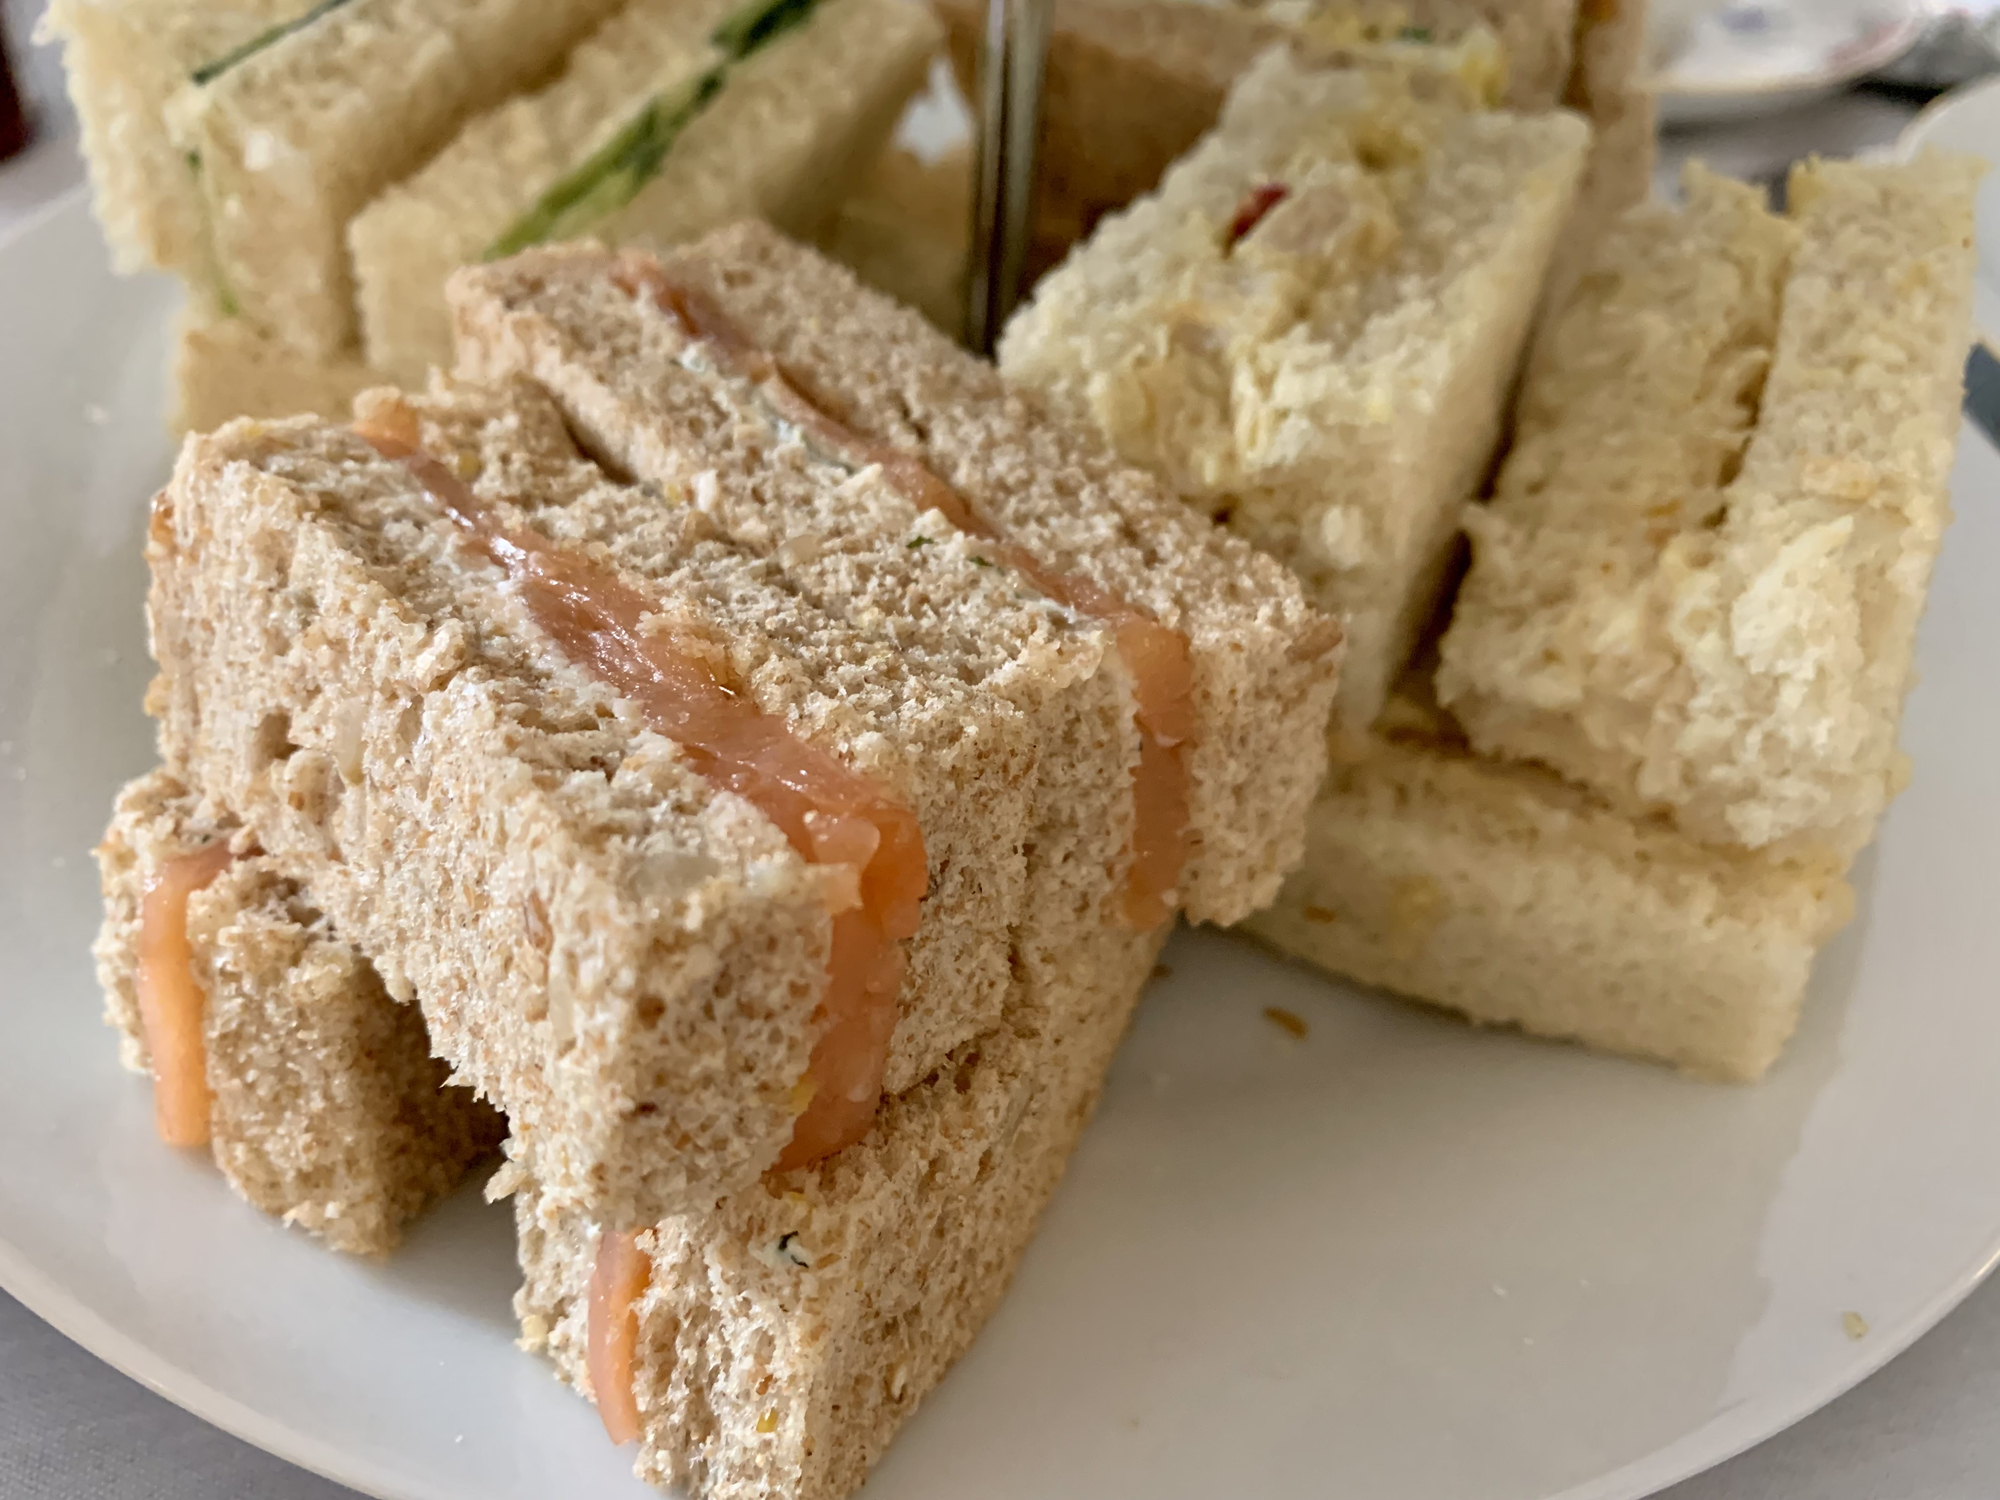 A plate of assorted cut sandwiches, including salmon and cucumber